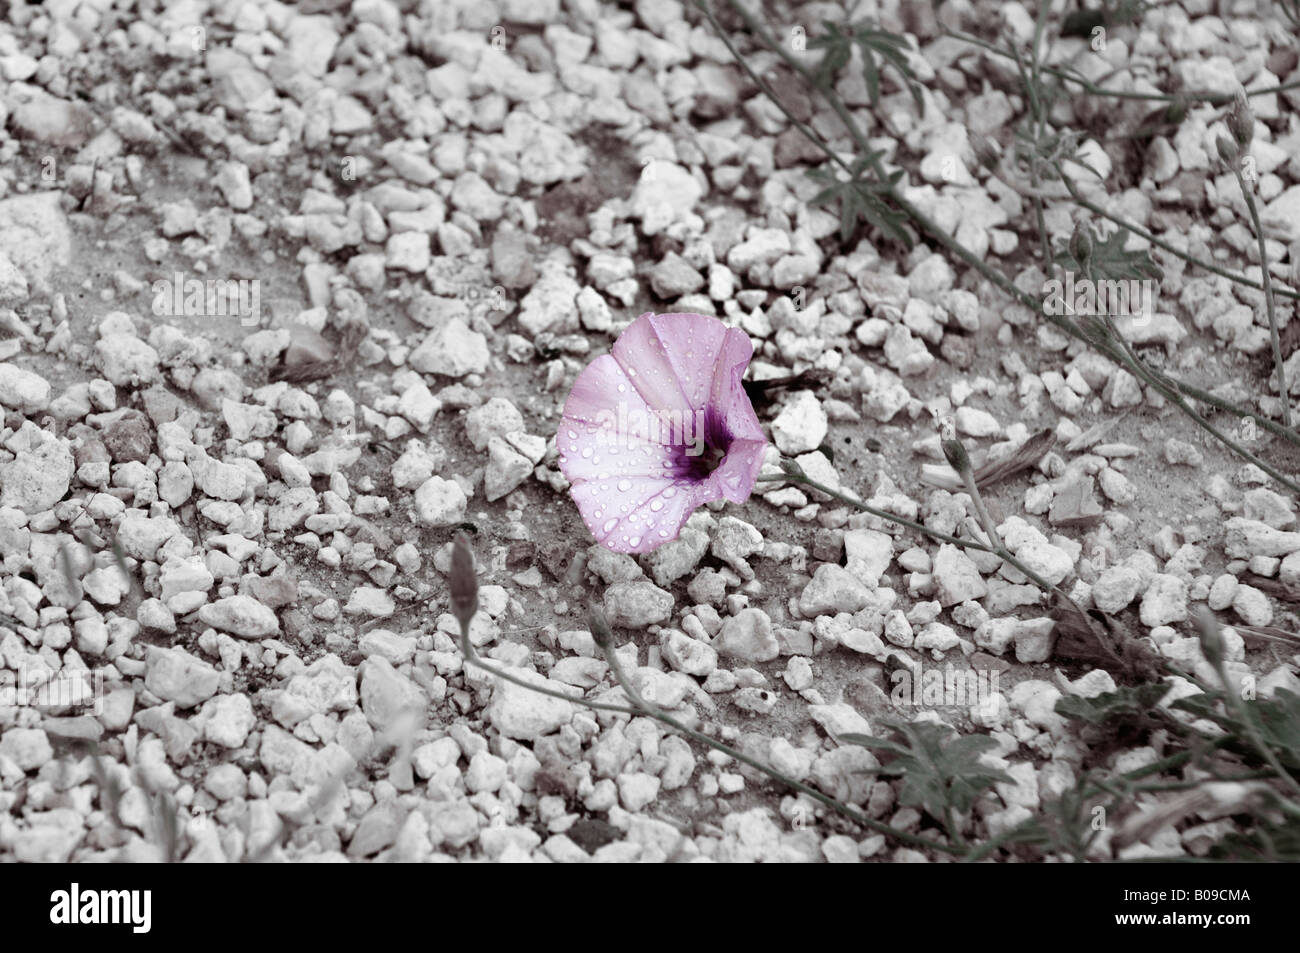 Small lonely flower on the ground Stock Photo